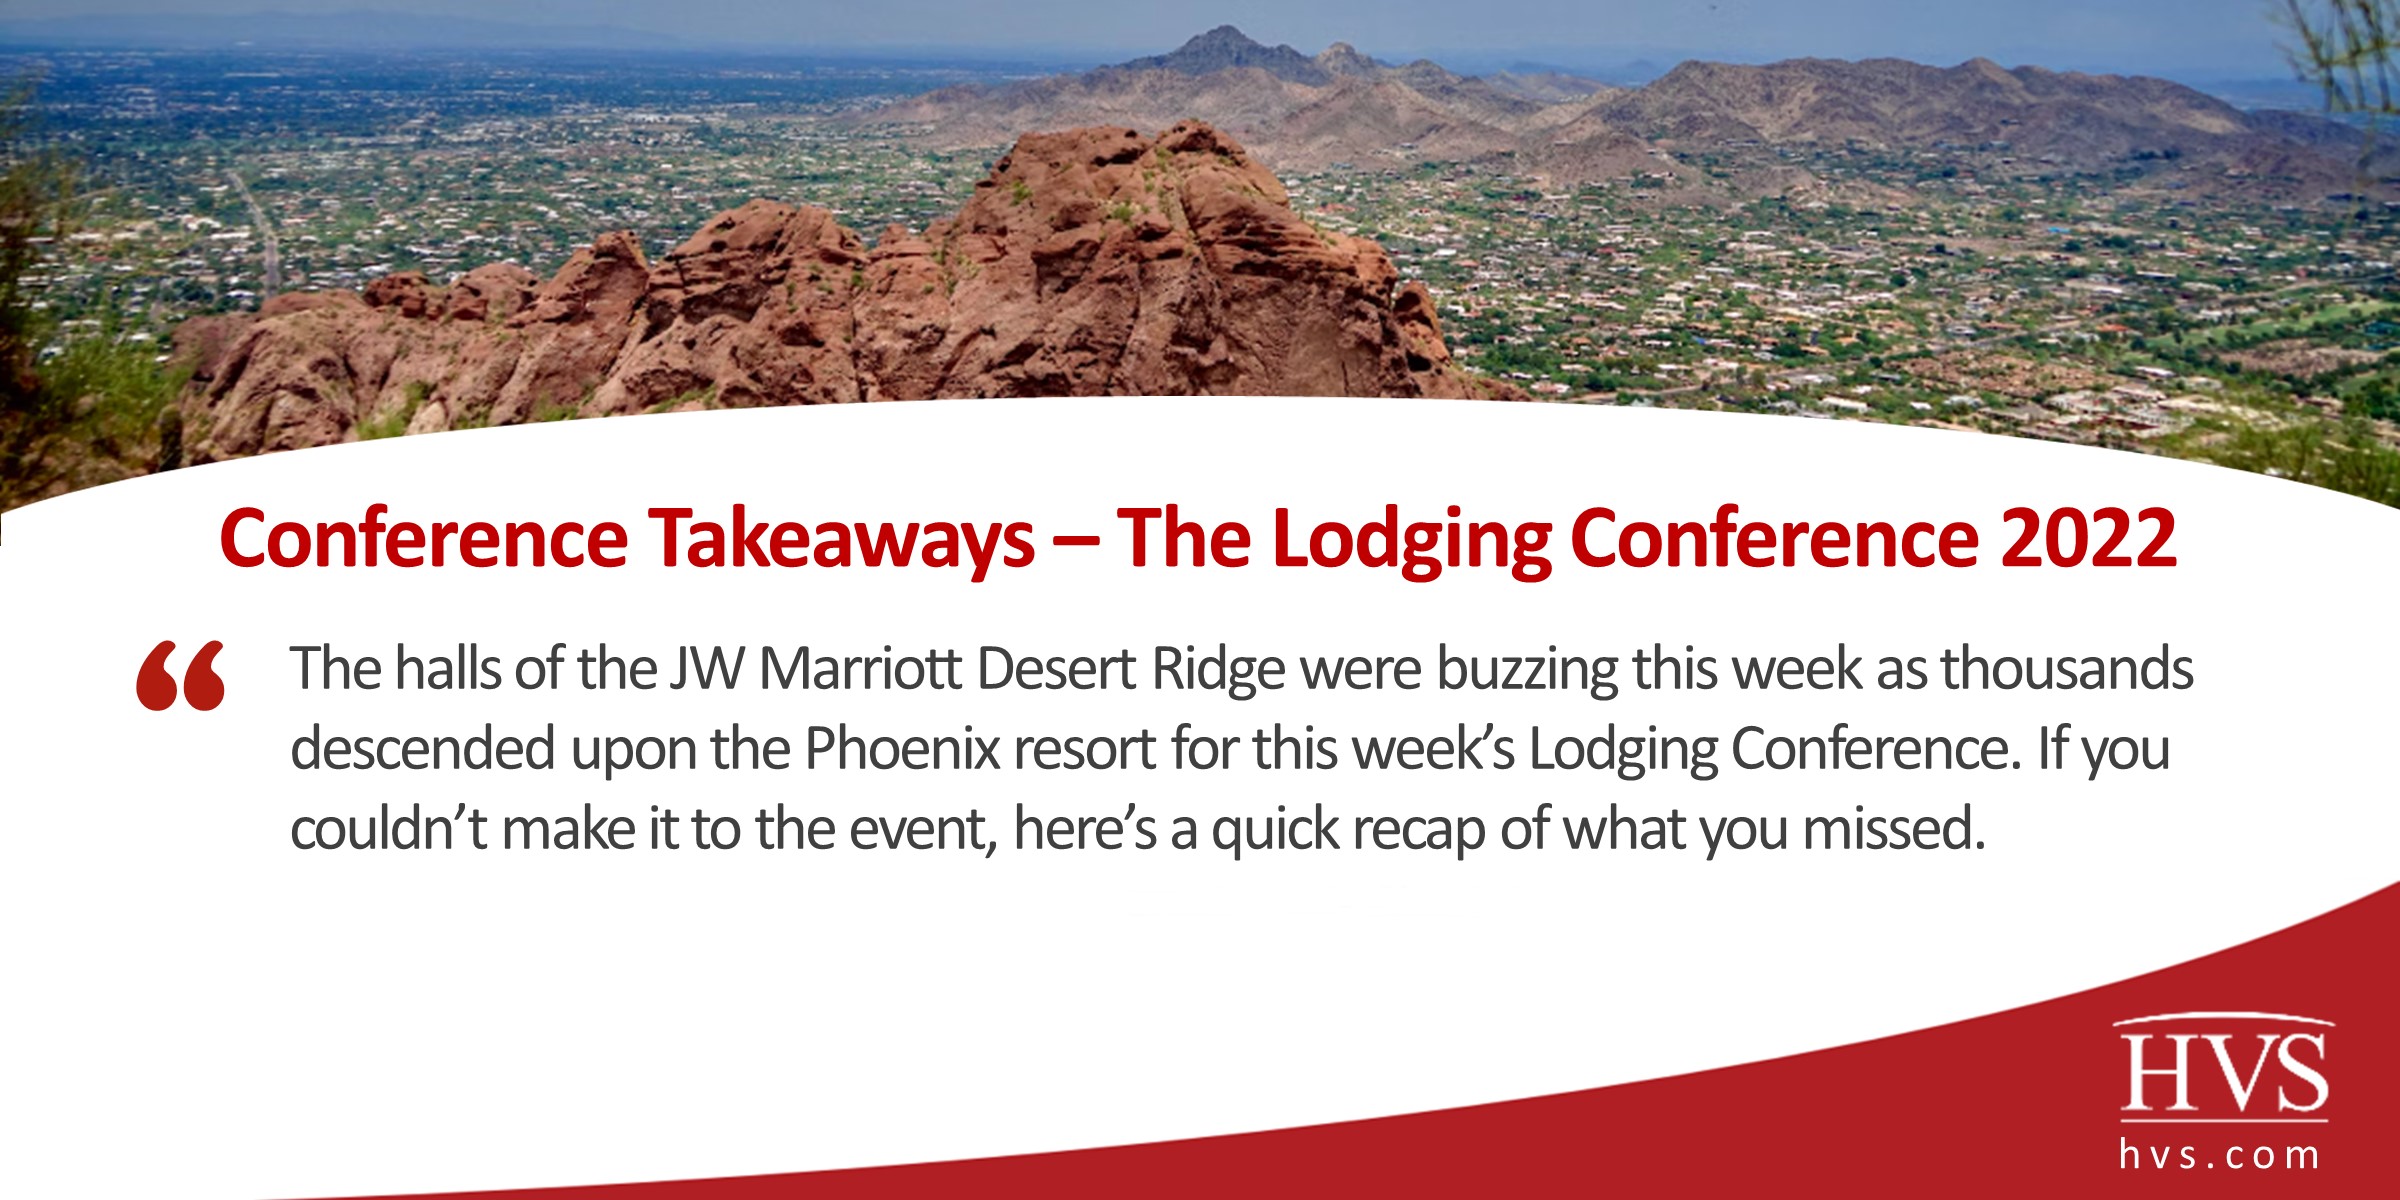 HVS Conference Takeaways The Lodging Conference 2022